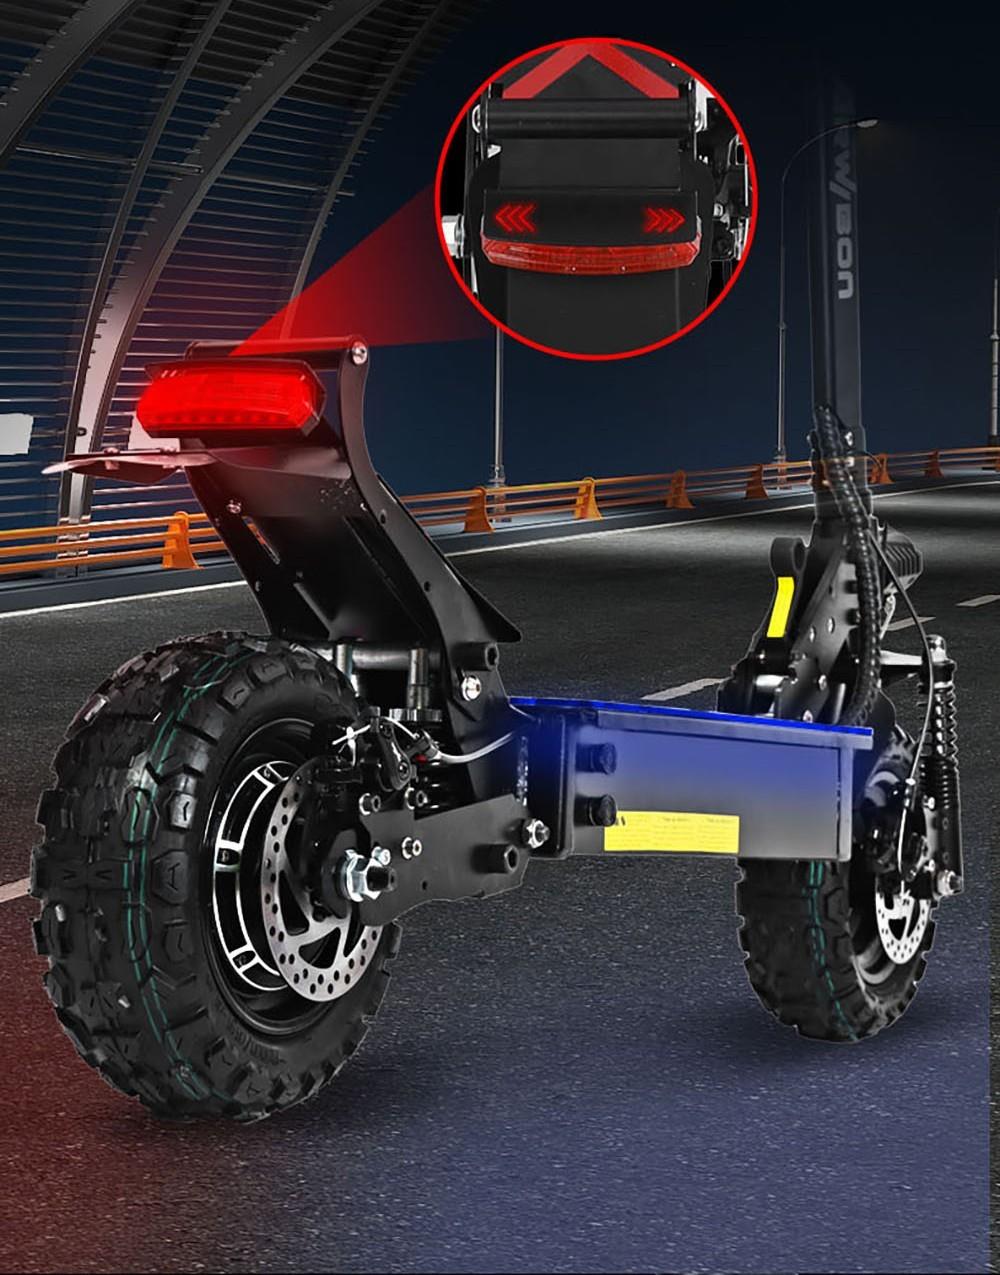 ARWIBON Q30 11 inch Off-road Tire Electric Scooter, 2500W Motor, 60km/h Max Speed, 16Ah Battery, 60km Range